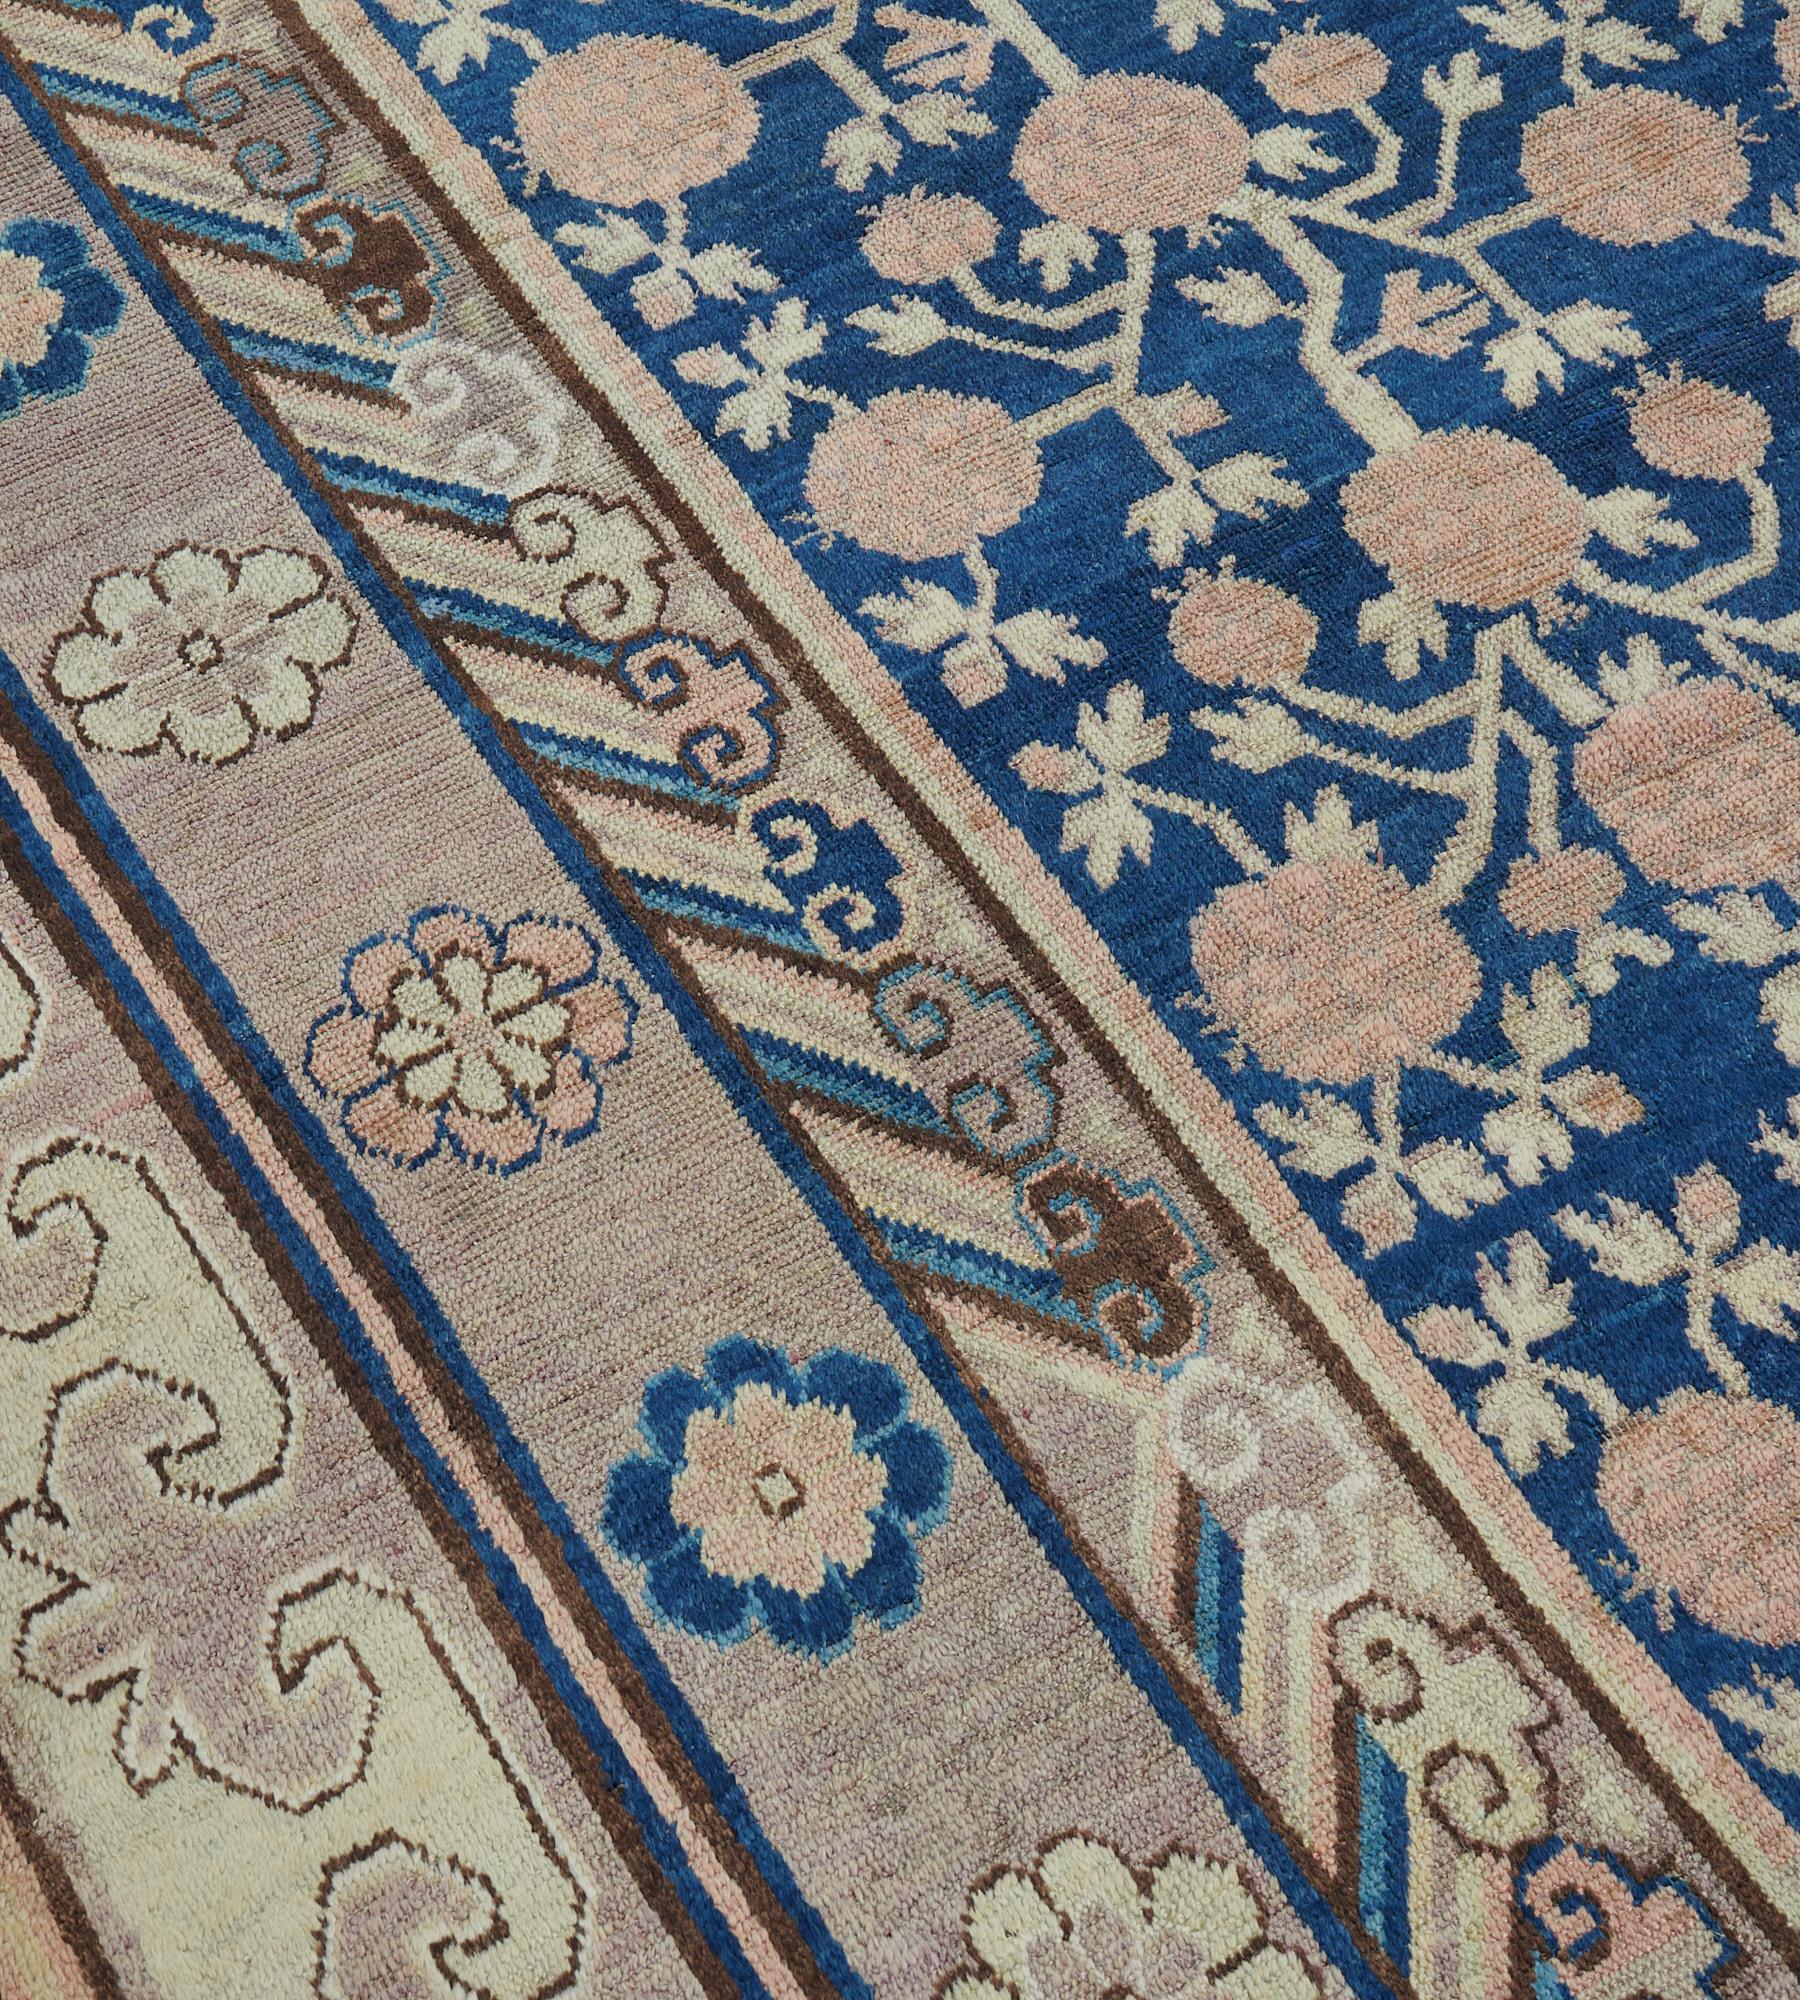 Antique Royal Blue Handwoven Wool Pomegranate Khotan Rug In Good Condition For Sale In West Hollywood, CA